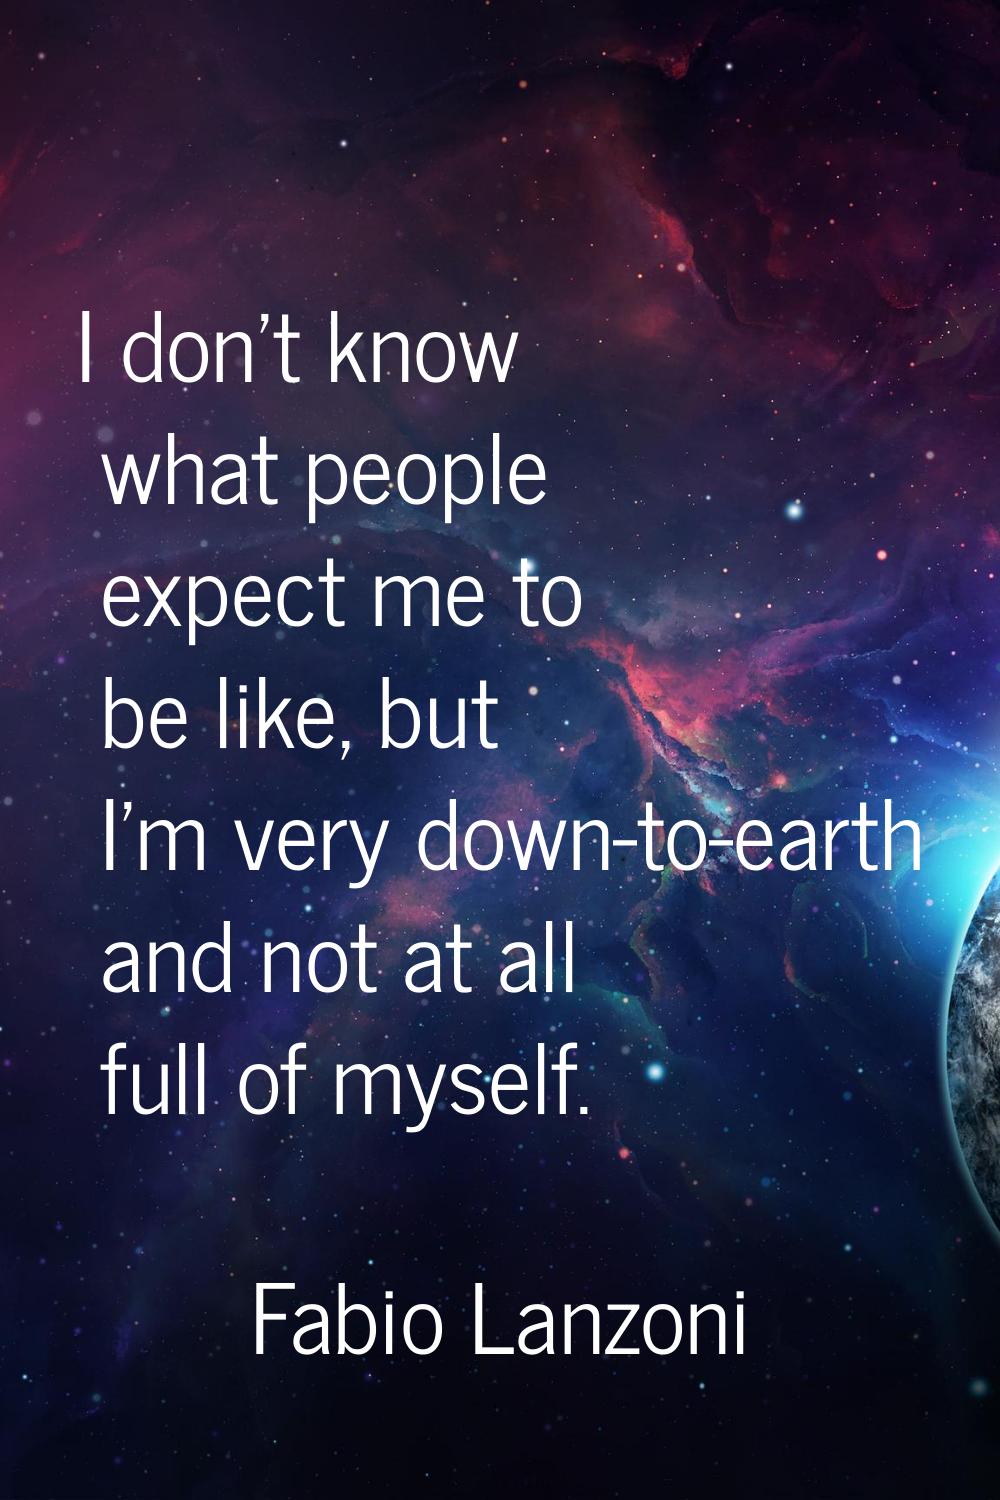 I don't know what people expect me to be like, but I'm very down-to-earth and not at all full of my